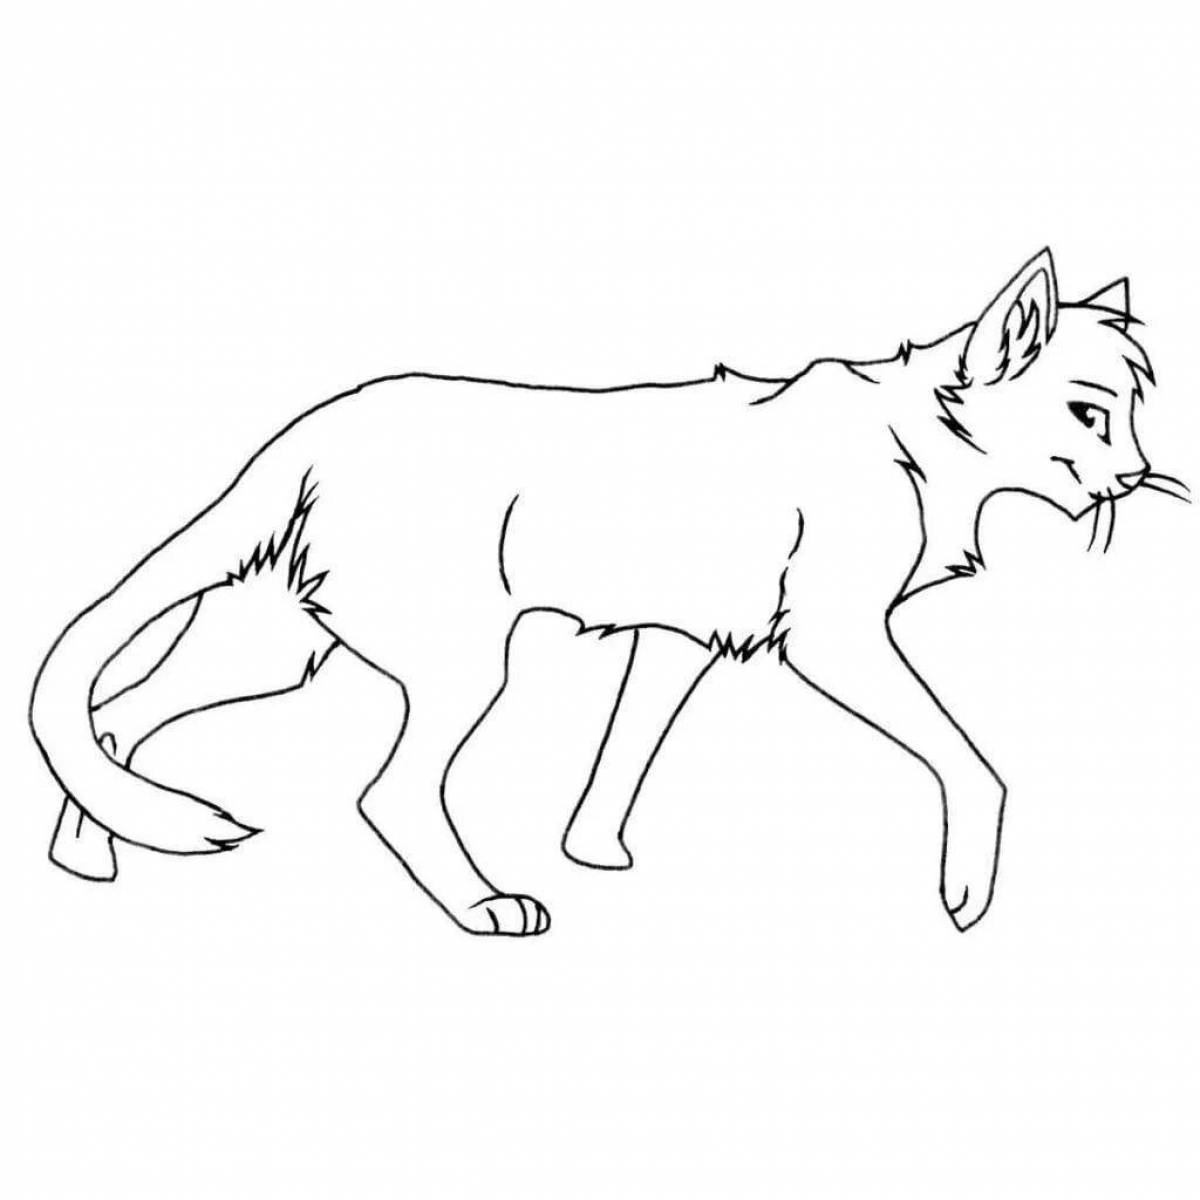 Great warrior cats coloring book